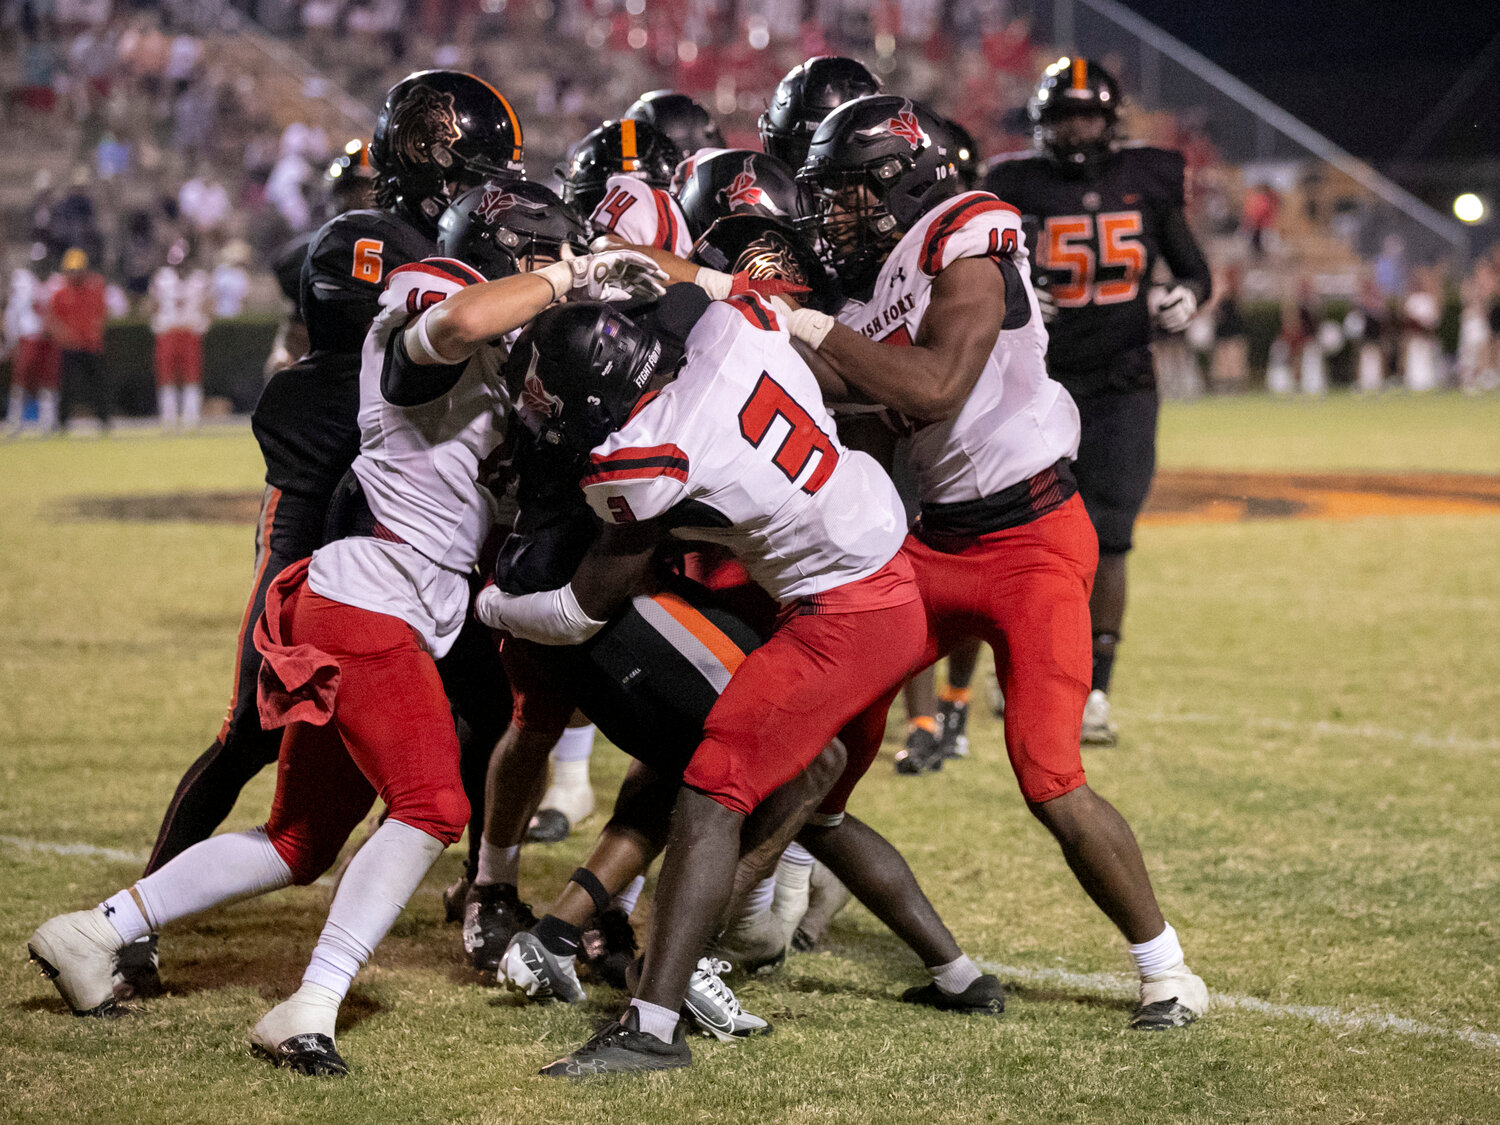 The Spanish Fort Toro defense, including Landon York (16), Markell Kyer (3), Drew Pannone (14) and Sterling Dixon (10), stand up a Baldwin County ballcarrier Friday night in Class 6A Region 1 action at Lyle Underwood Stadium in Bay Minette. Spanish Fort came up with two turnovers on downs in the final five minutes of regulation to preserve a 14-13 win over the Tigers.